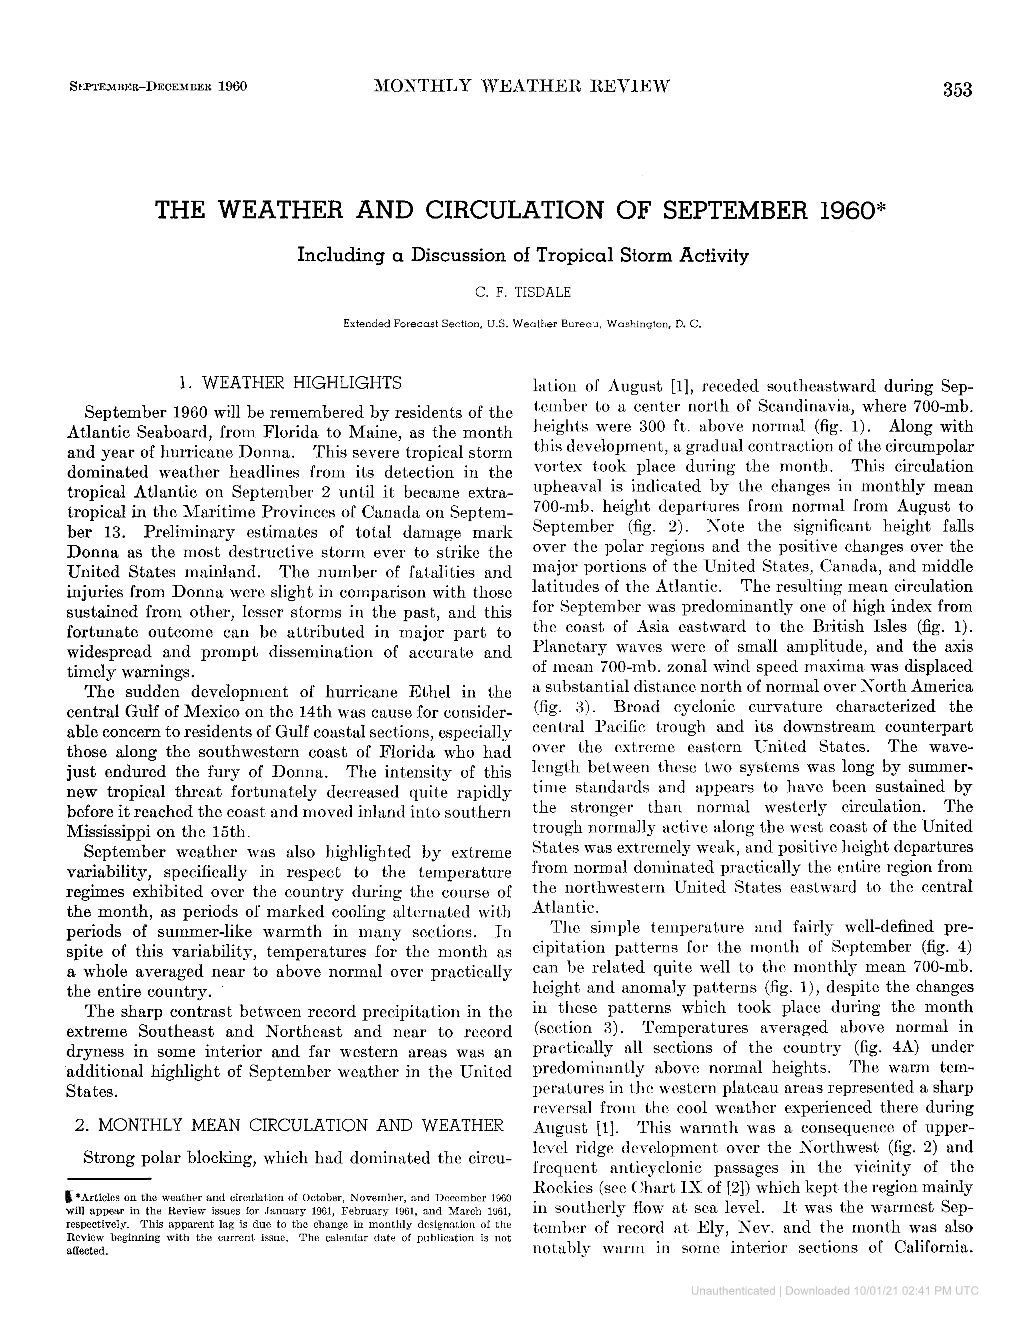 The Weather and Circulation of September 1960*